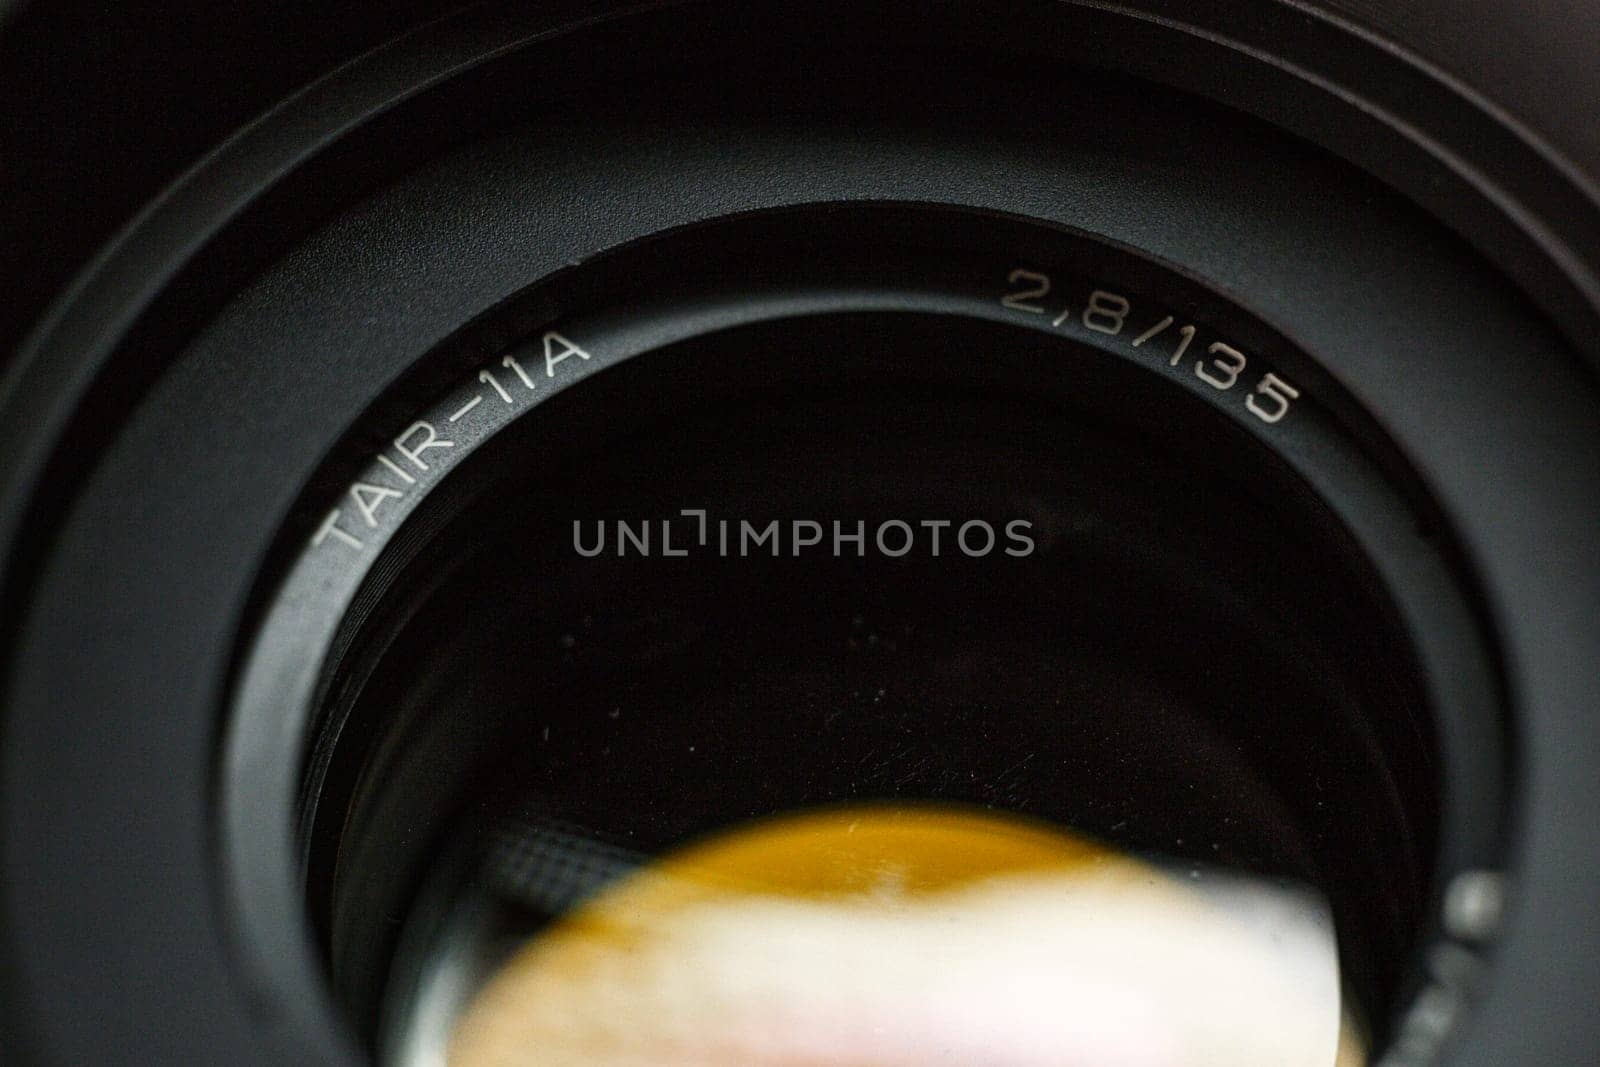 Detailed view of TAIR-11A camera lens engraving, with focal length and aperture value, precision instrument for photography, against a blurred dark background.